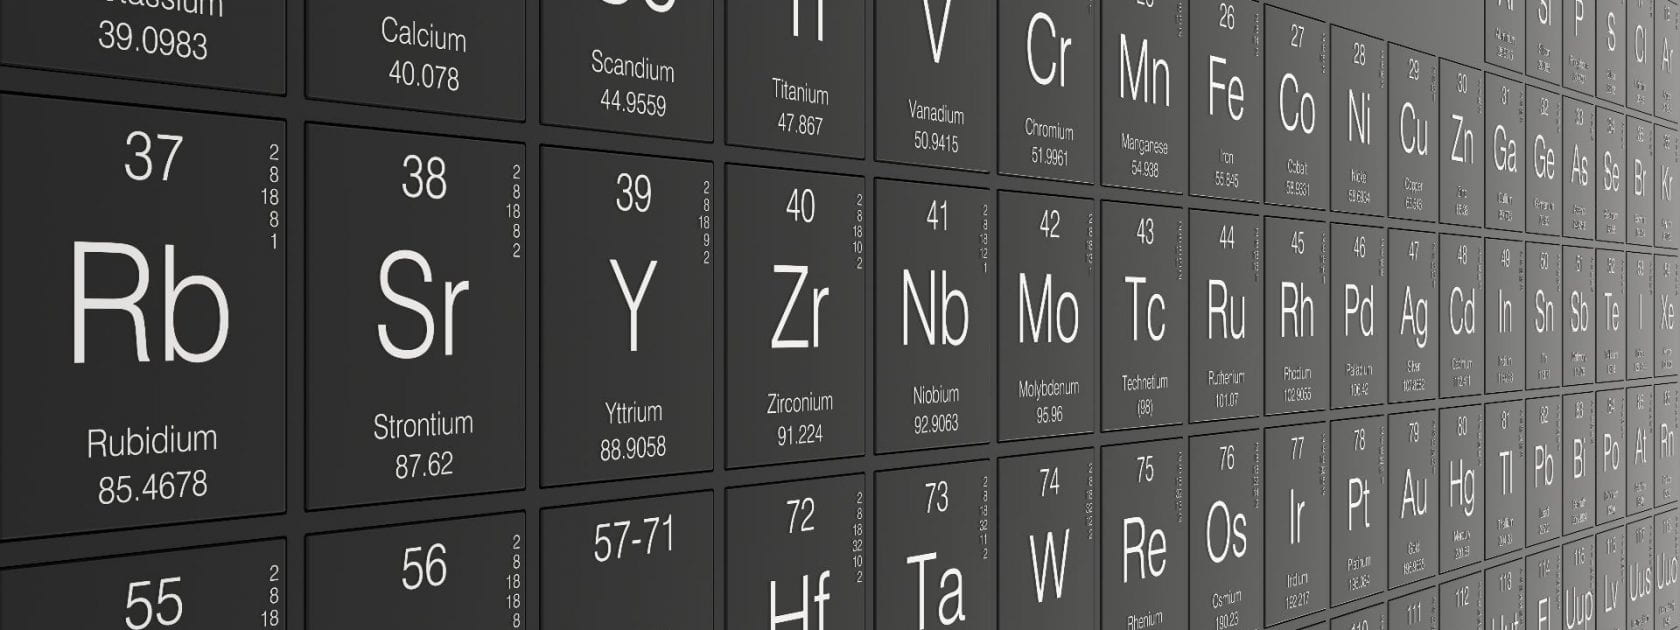 Image of Periodic System of the Elements